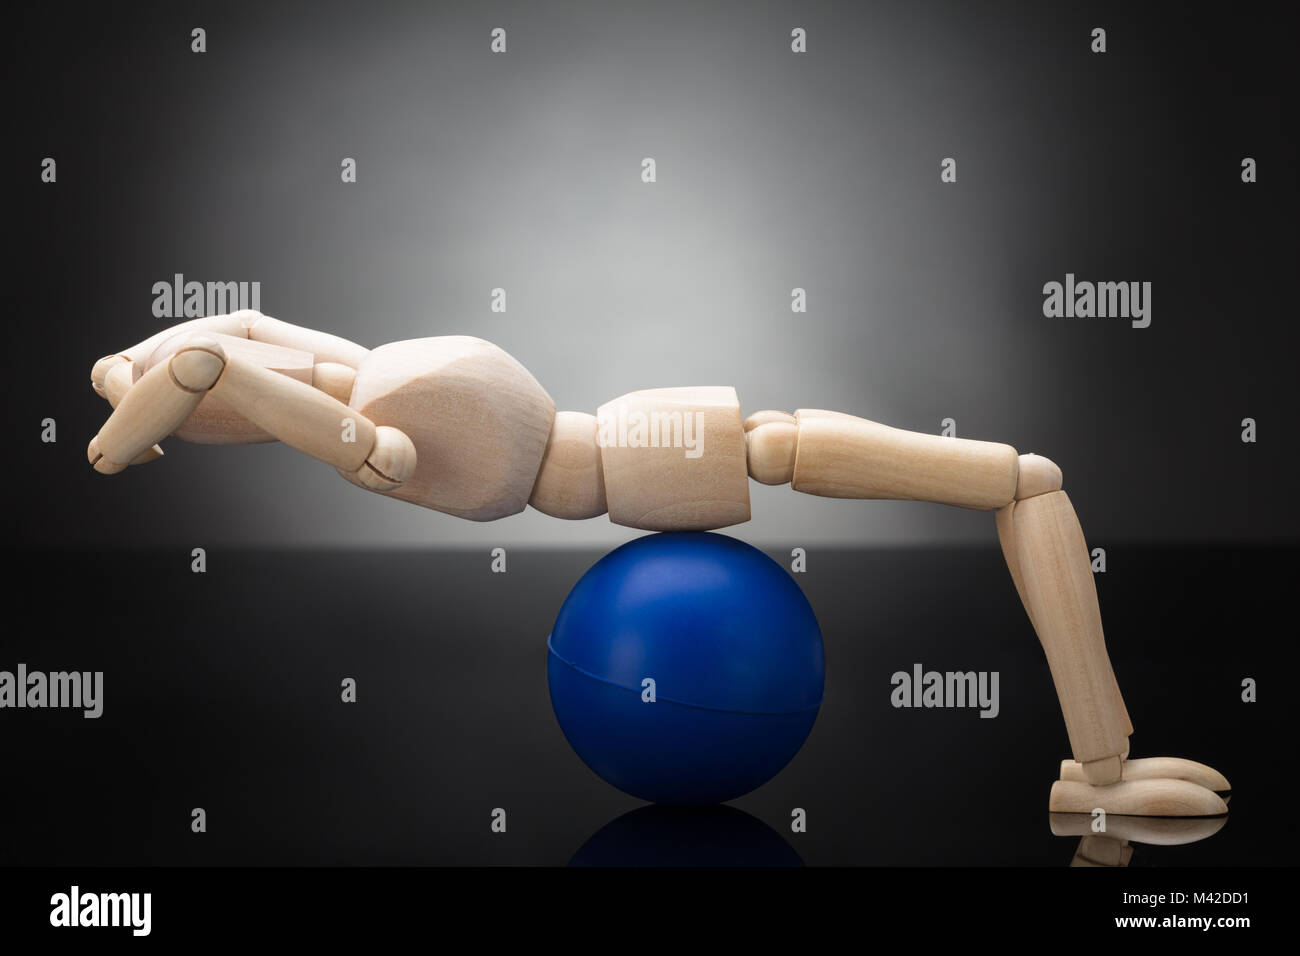 Side View Of A Wooden Dummy Doing Workout On Fitness Ball Against Grey Background Stock Photo